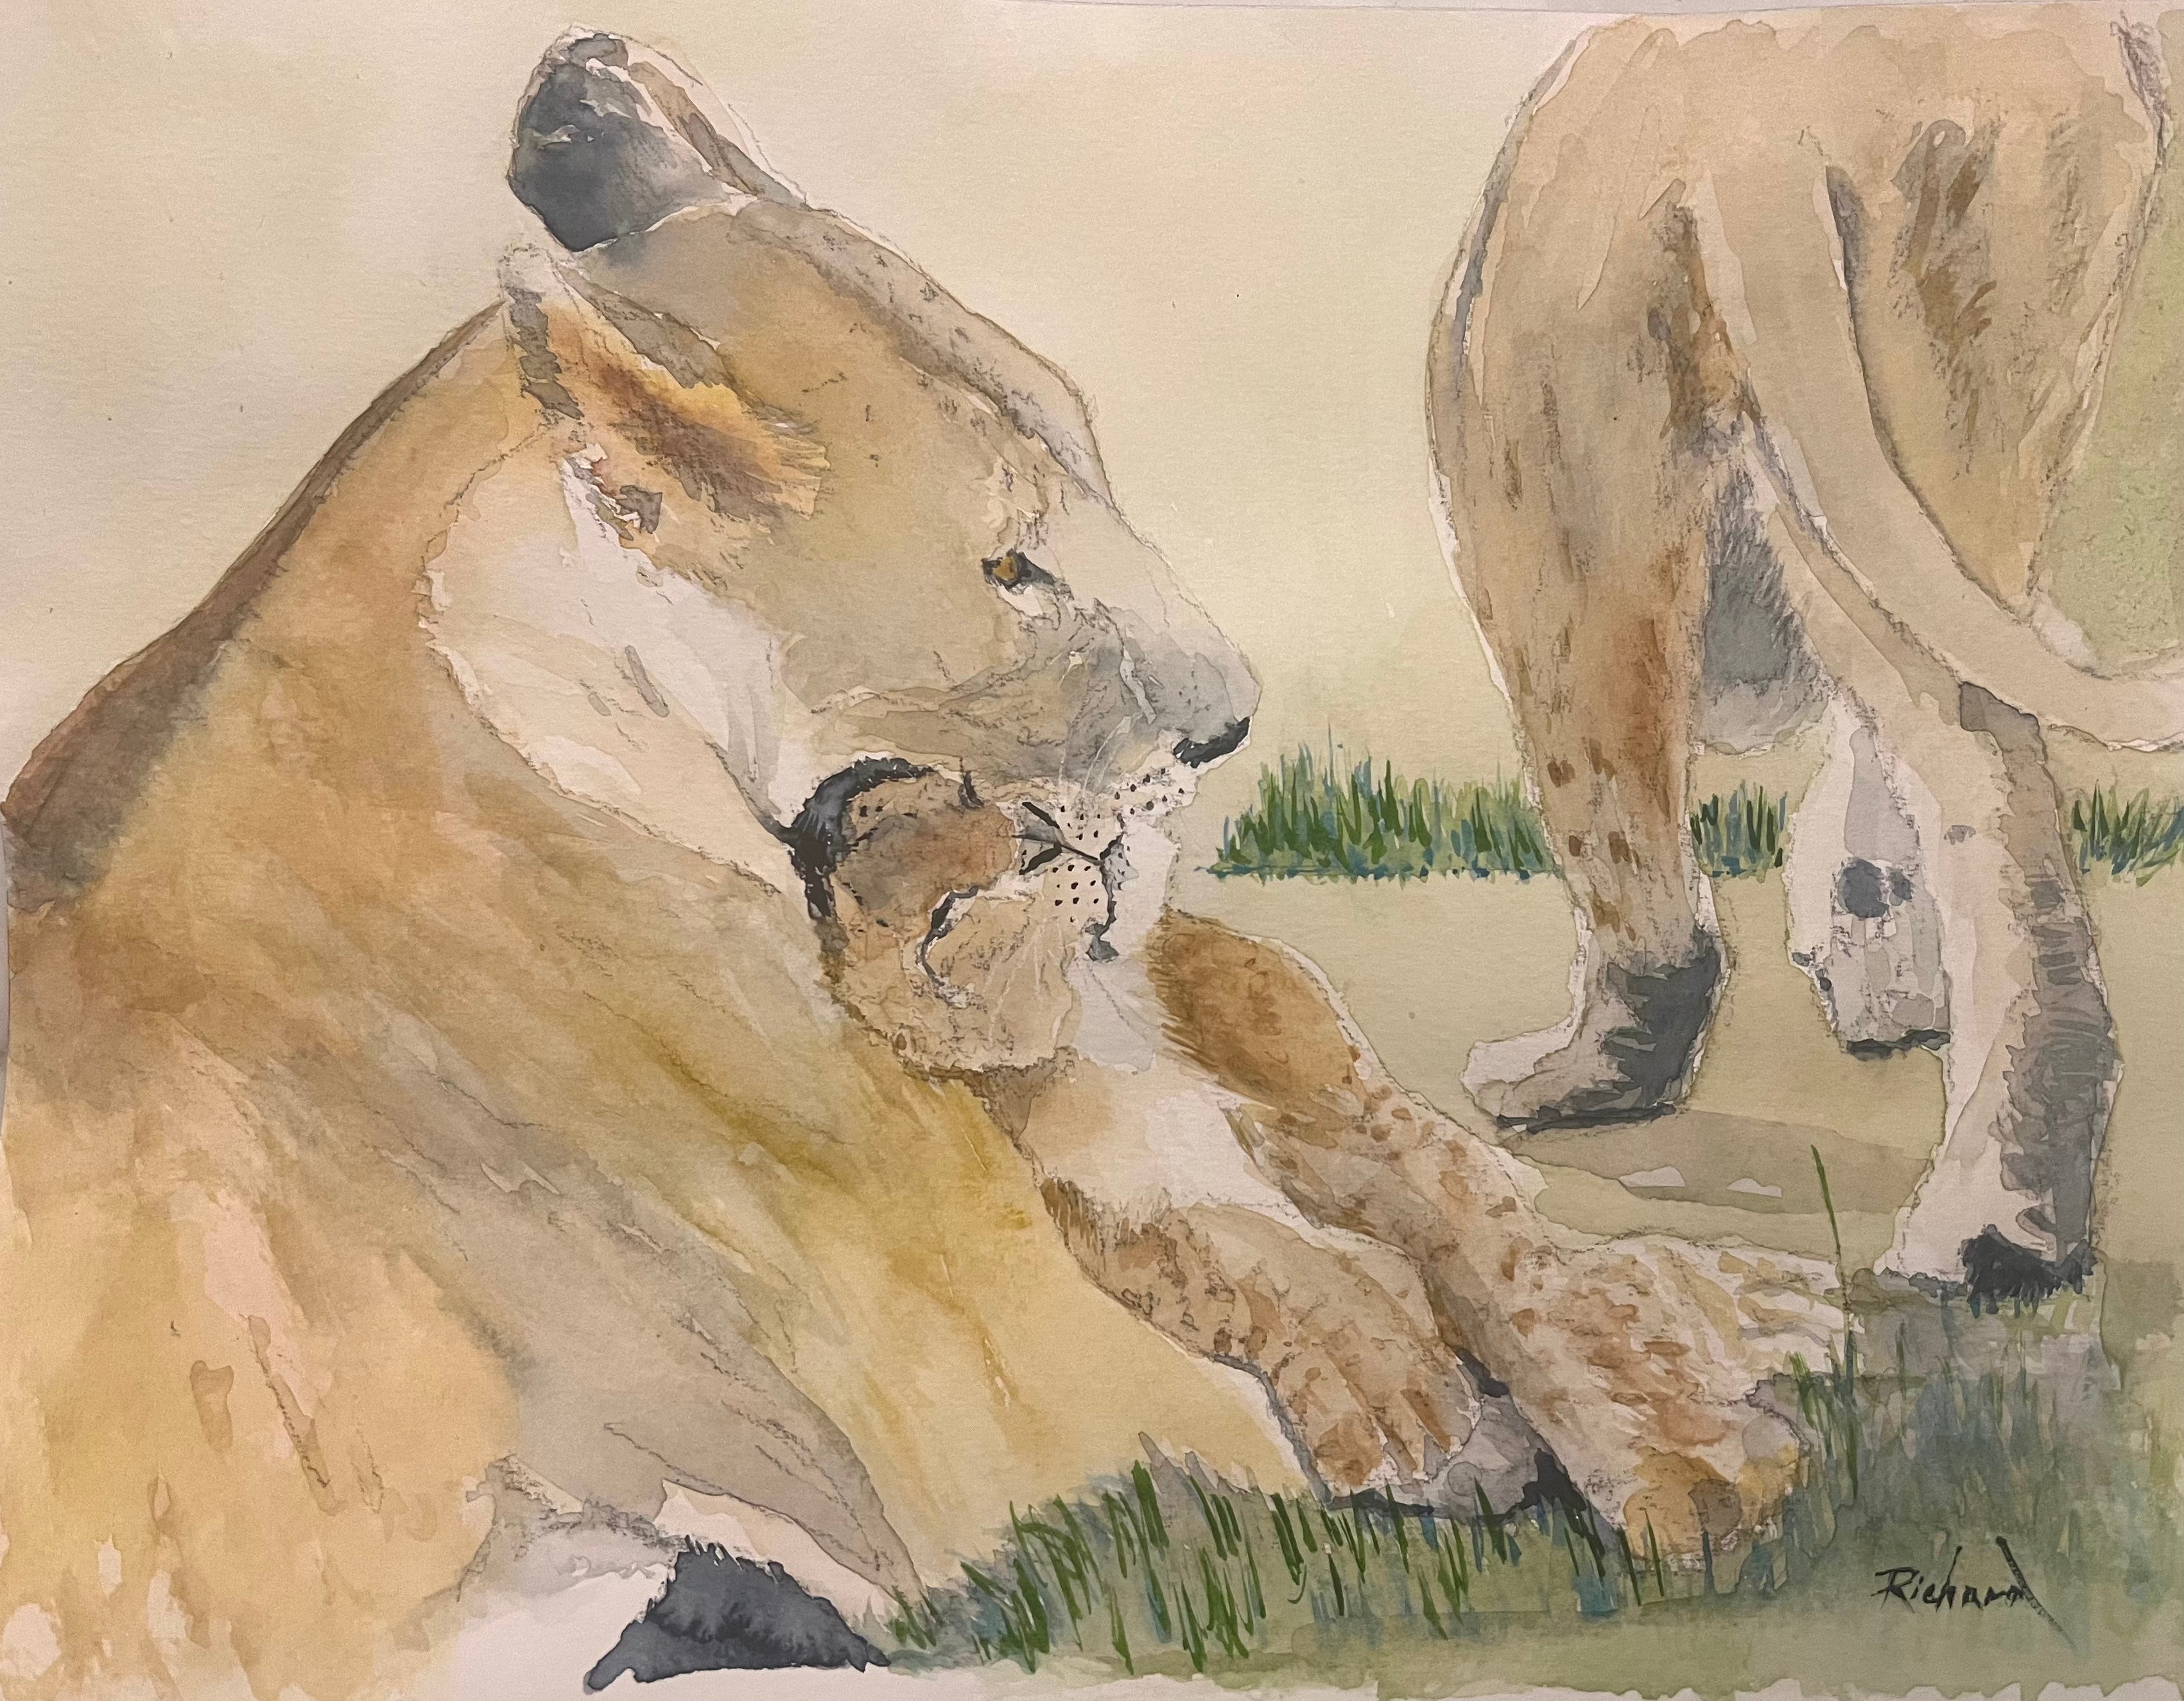 Mother and the Cub - a new commission piece for a family's Safari memories from Tanzania